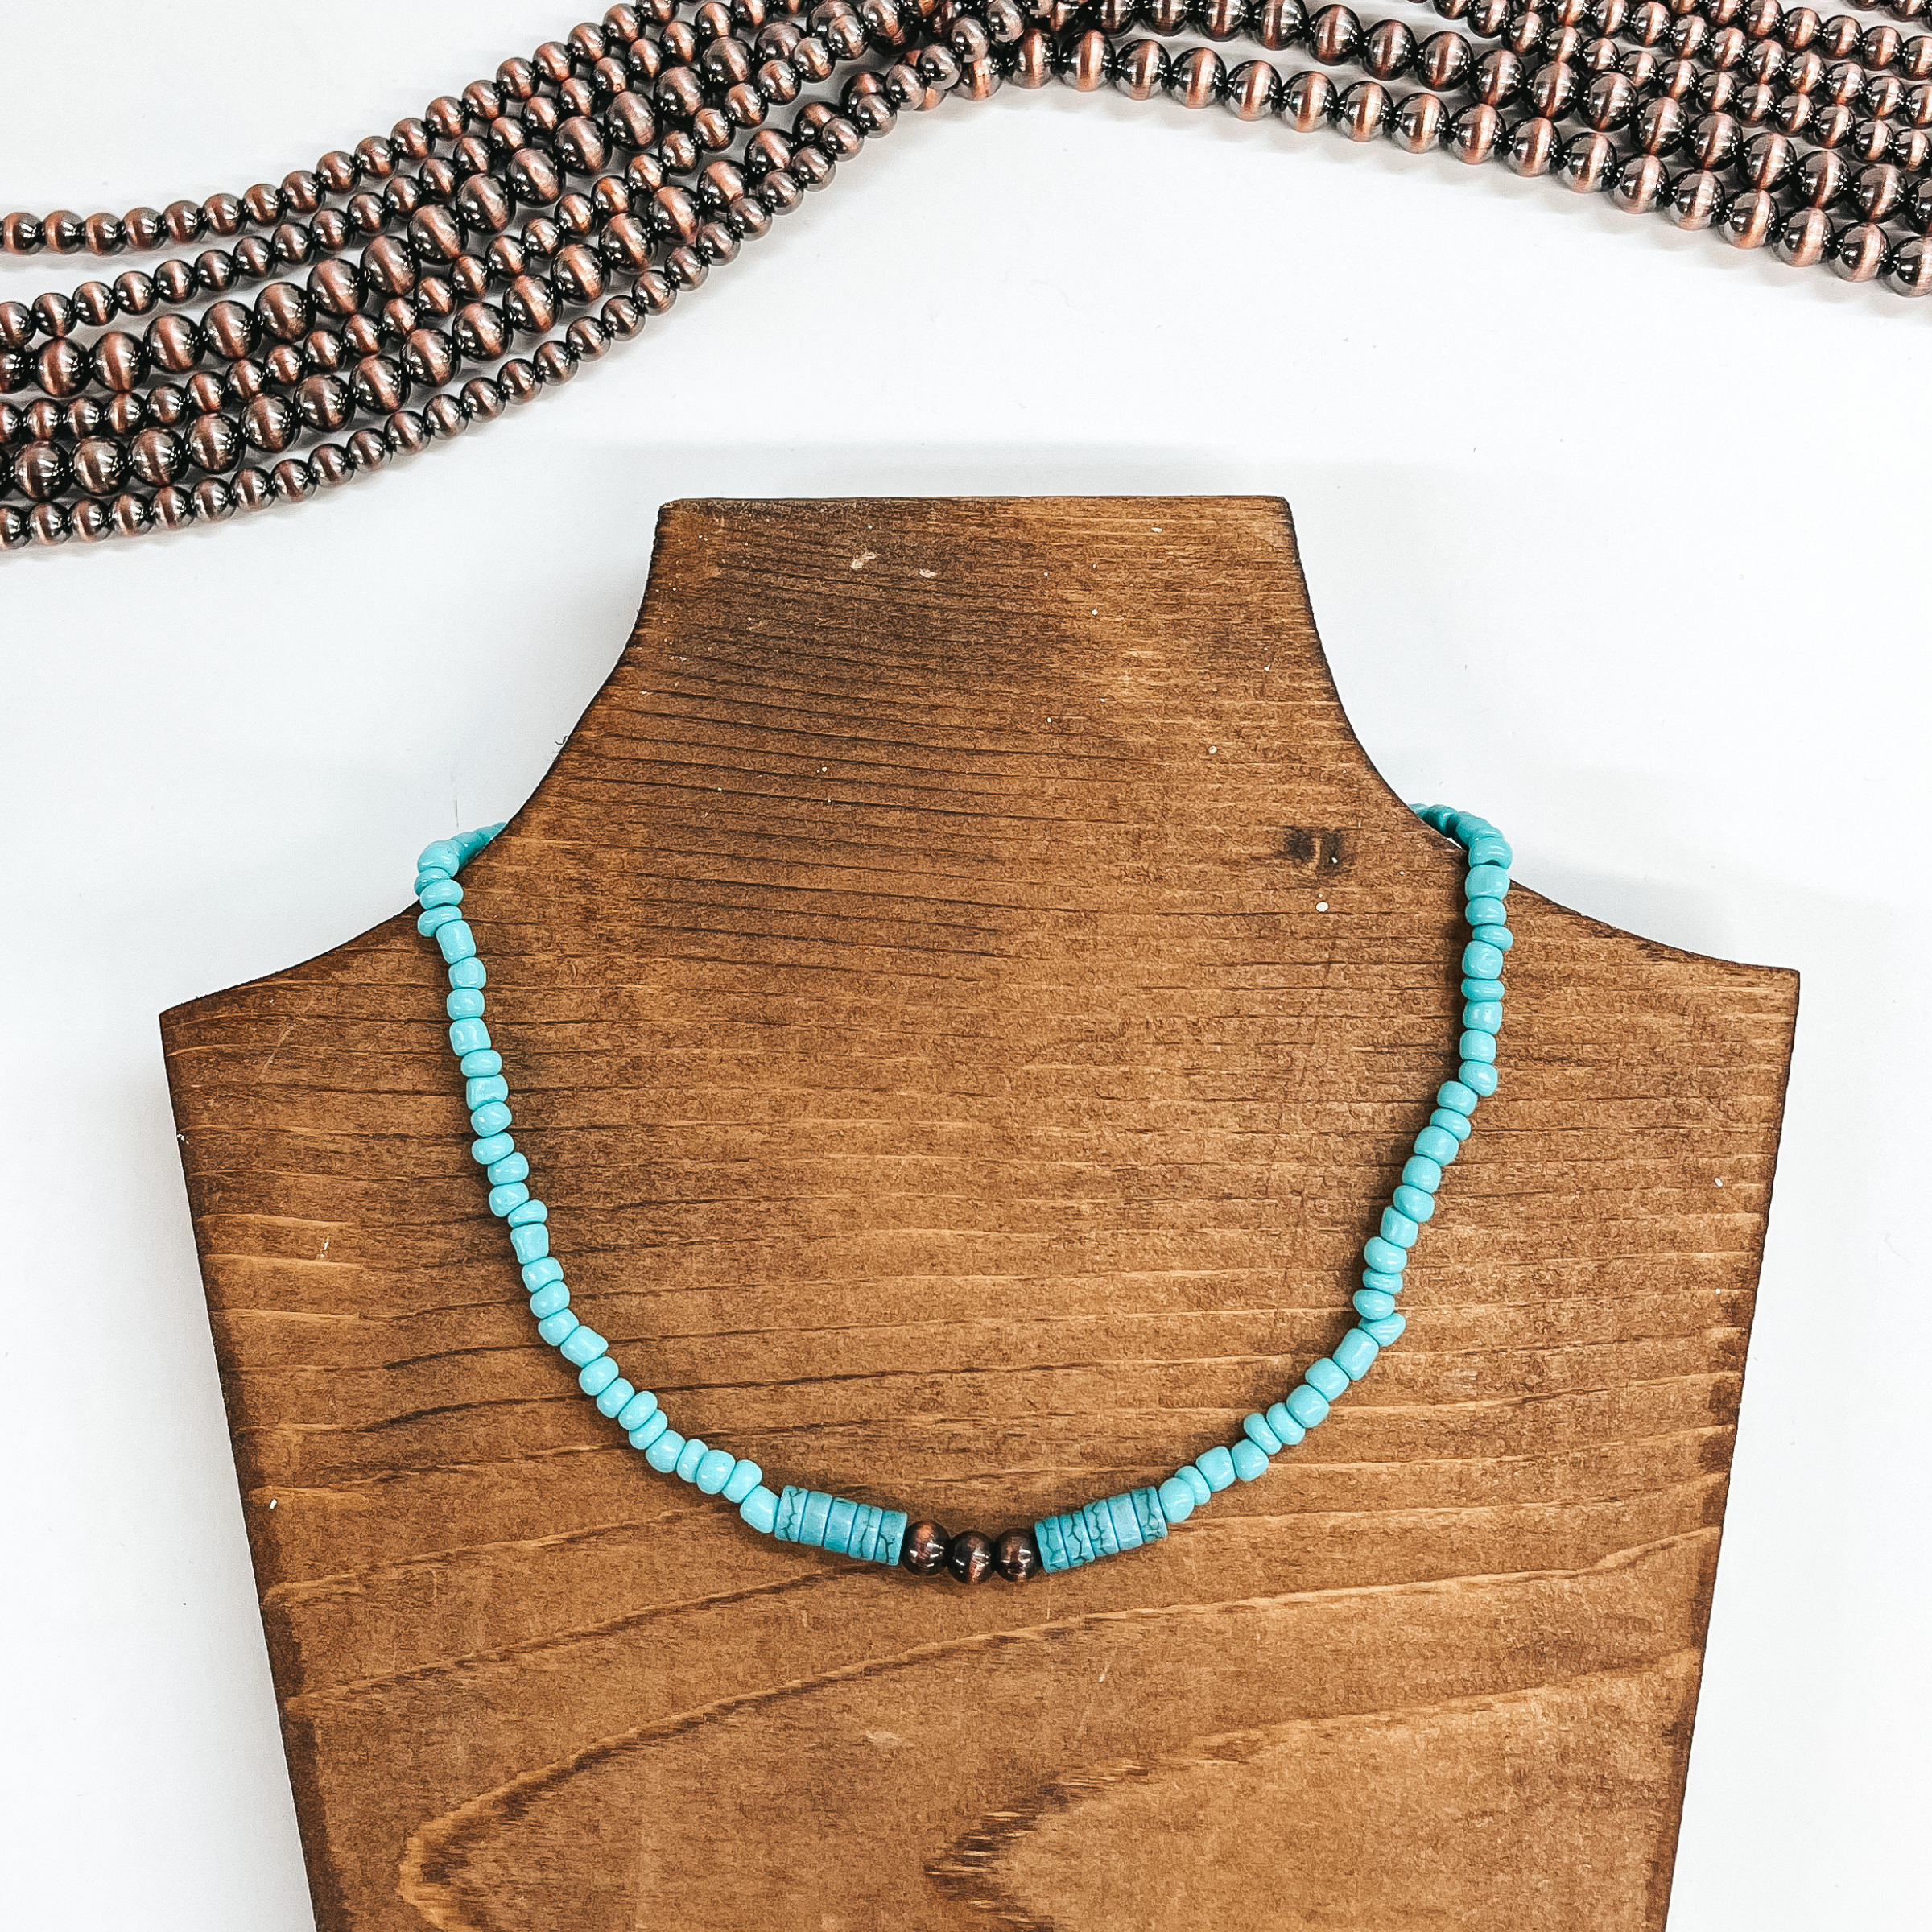 This is a turquoise beaded asymmetrical beads with  five teal/dark turquoise beads with three copper  faux navajo pearls in the center. This necklace is  taken on a brown necklace holder and white  background, their are copper navajo pearls in the  top as decor.